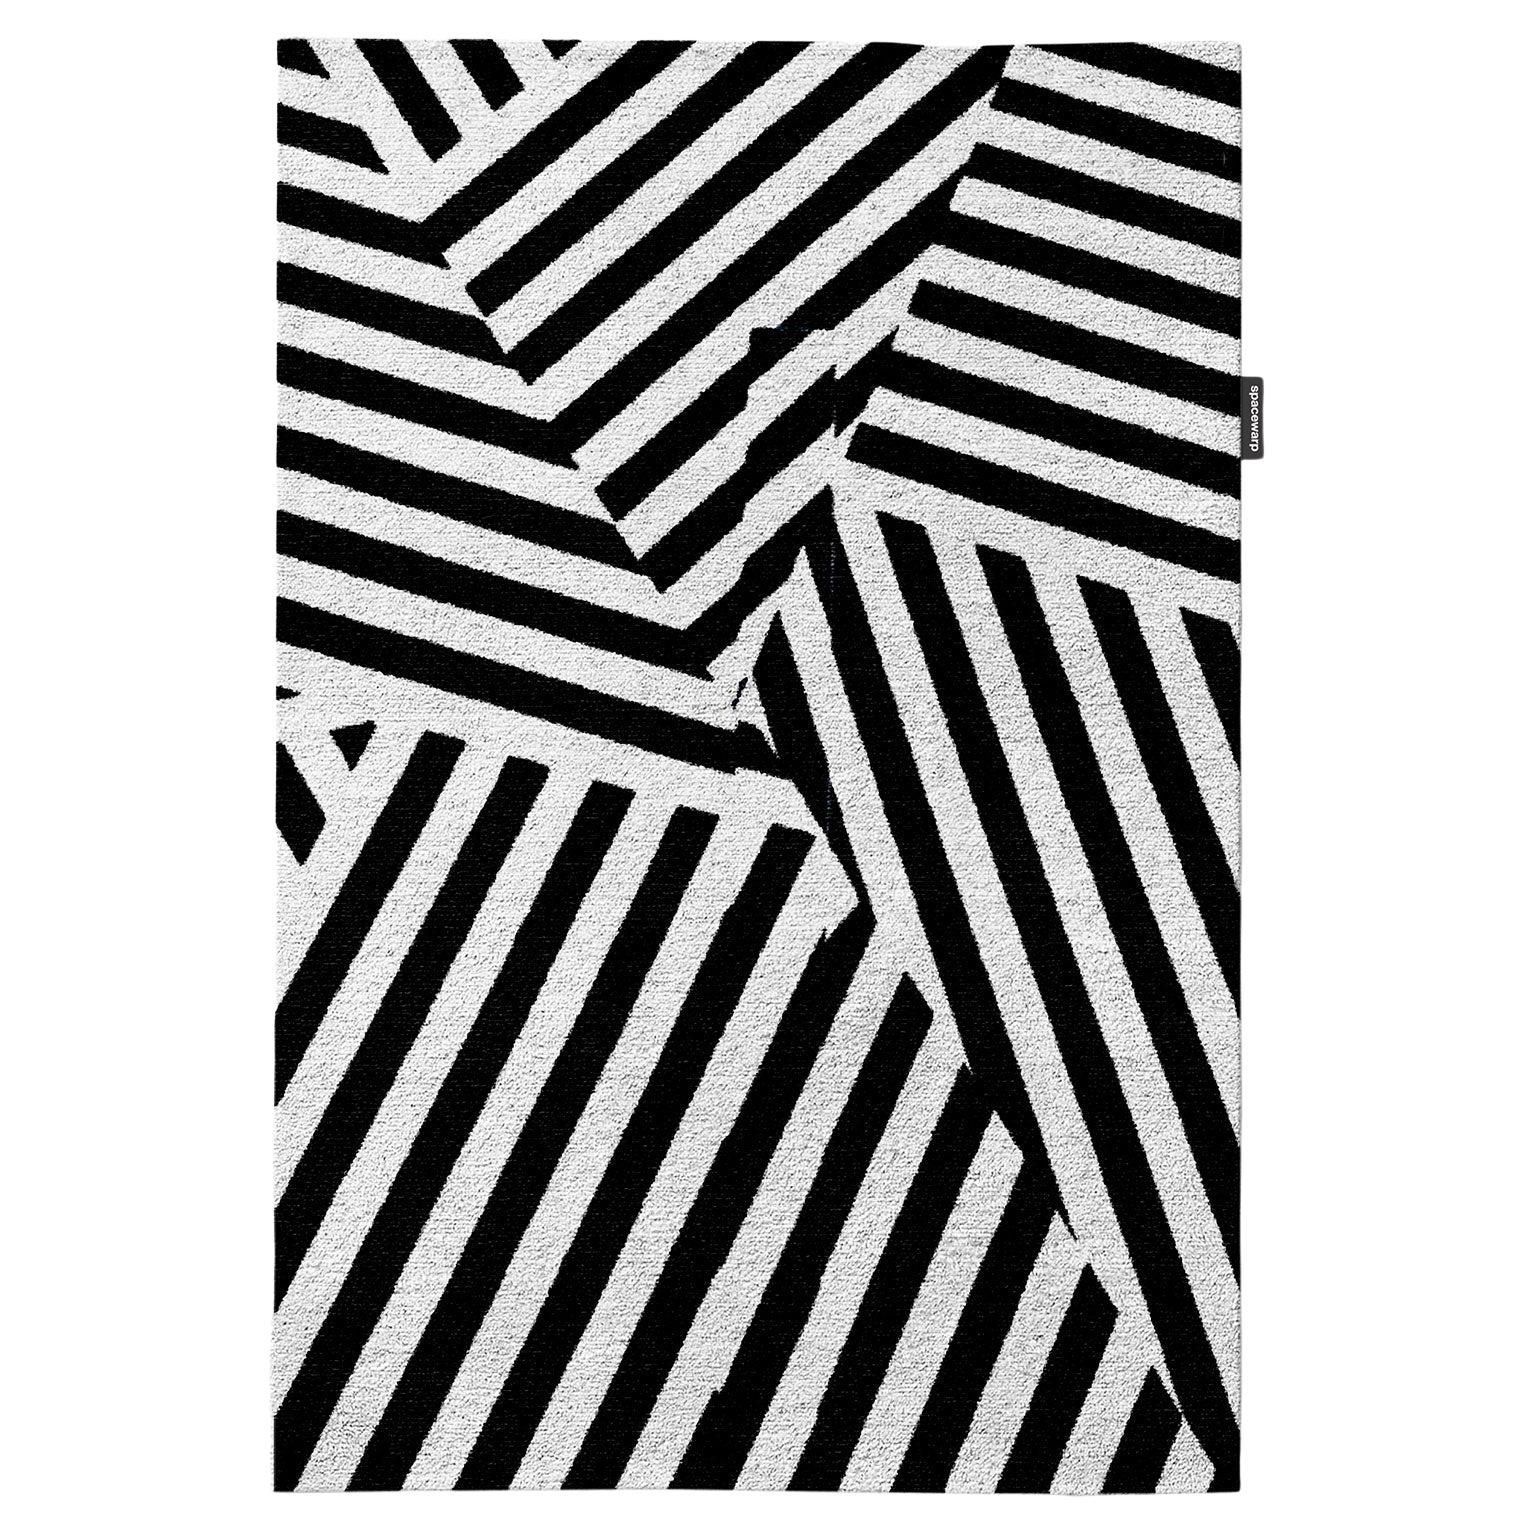 Hand Knotted Black and White Shibuya Crossing Rug by Spacewarp For Sale